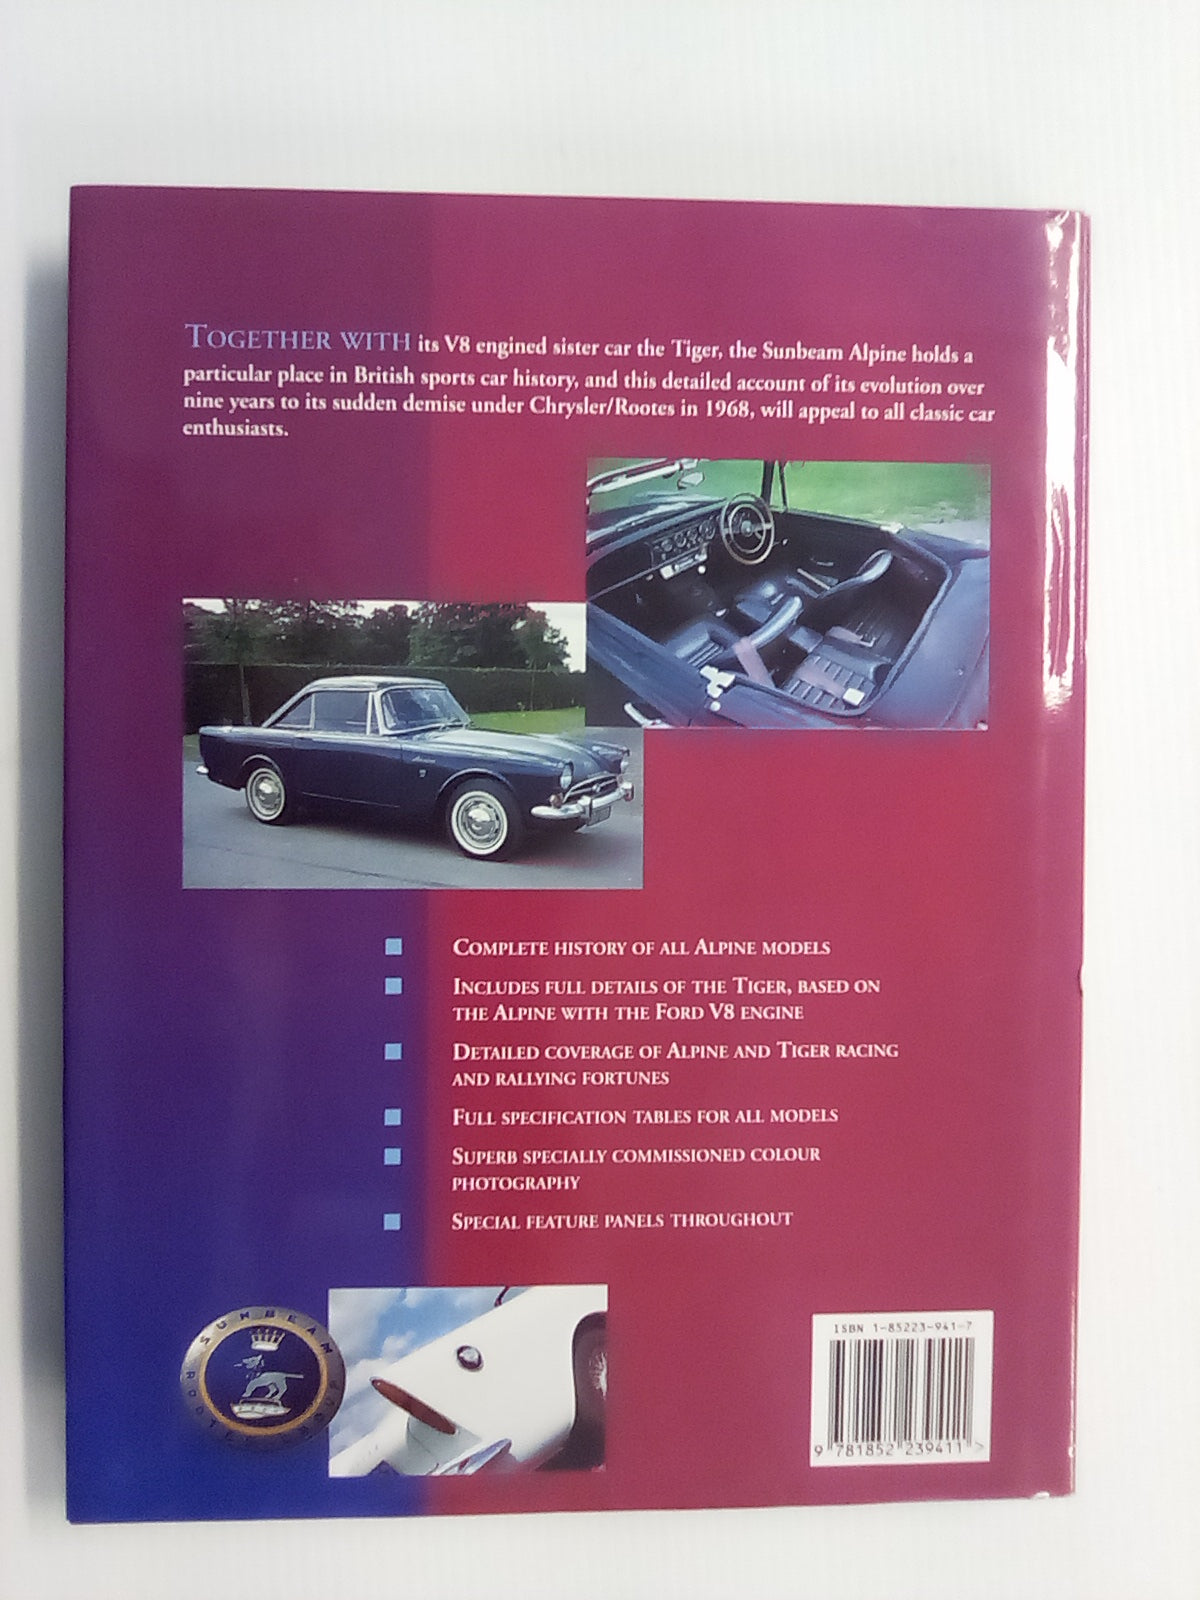 Sunbeam Alpine & Tiger - The Complete Story by Graham Robson